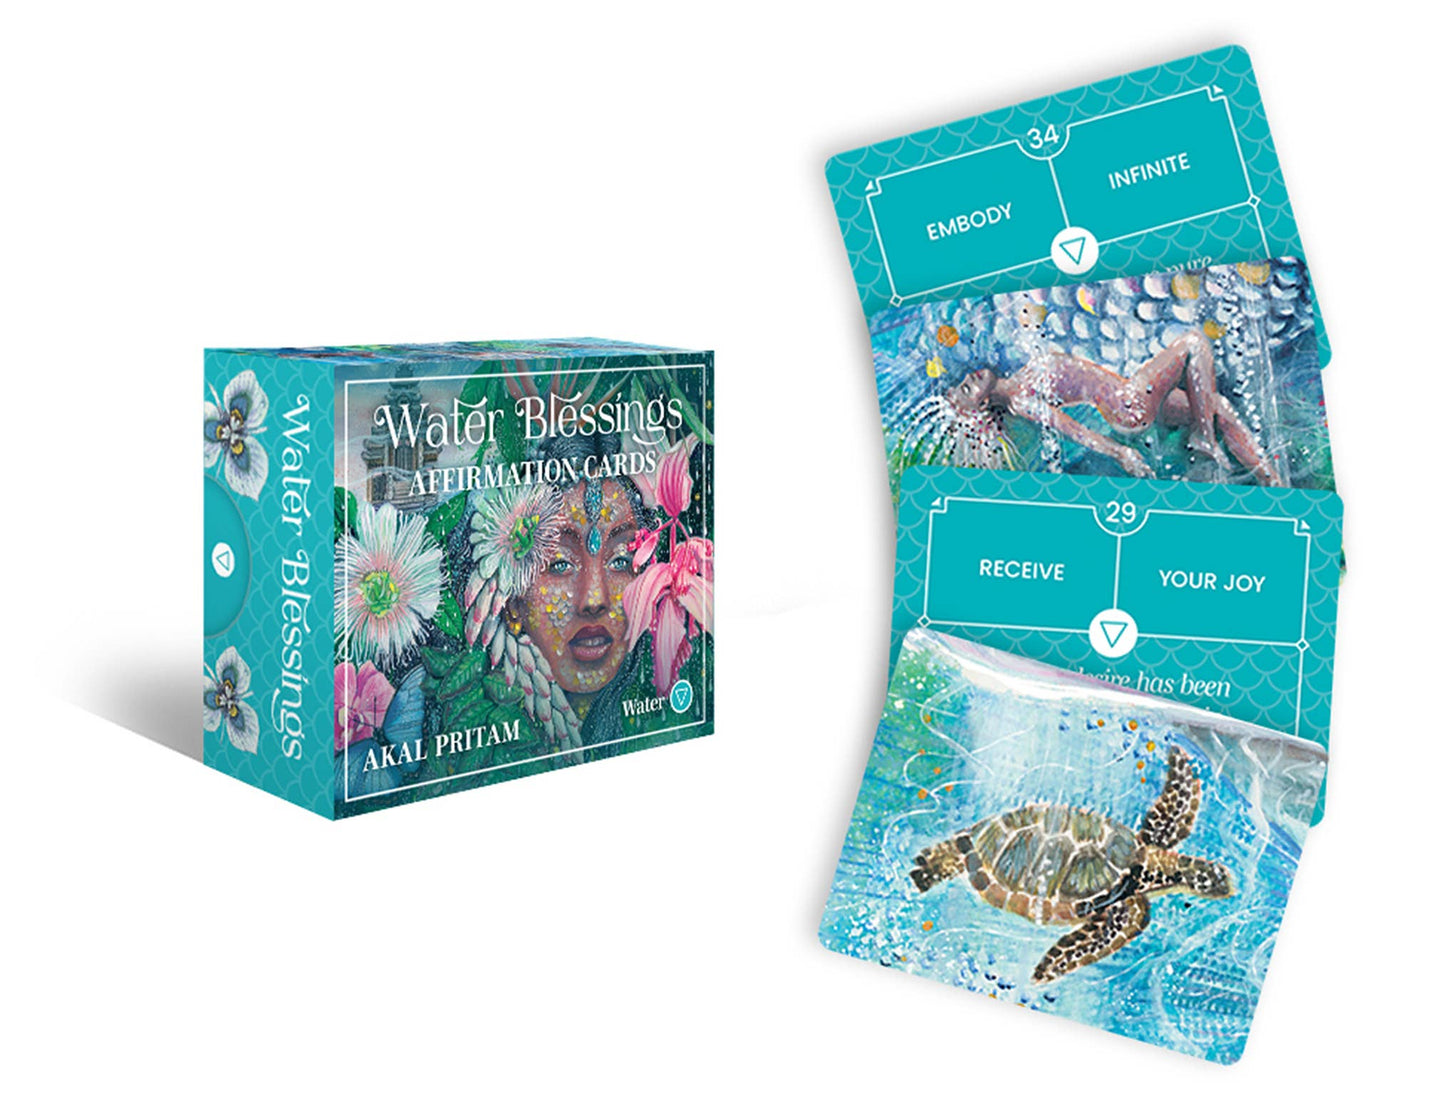 Water Blessings (40 Full-Color Affirmation Cards)